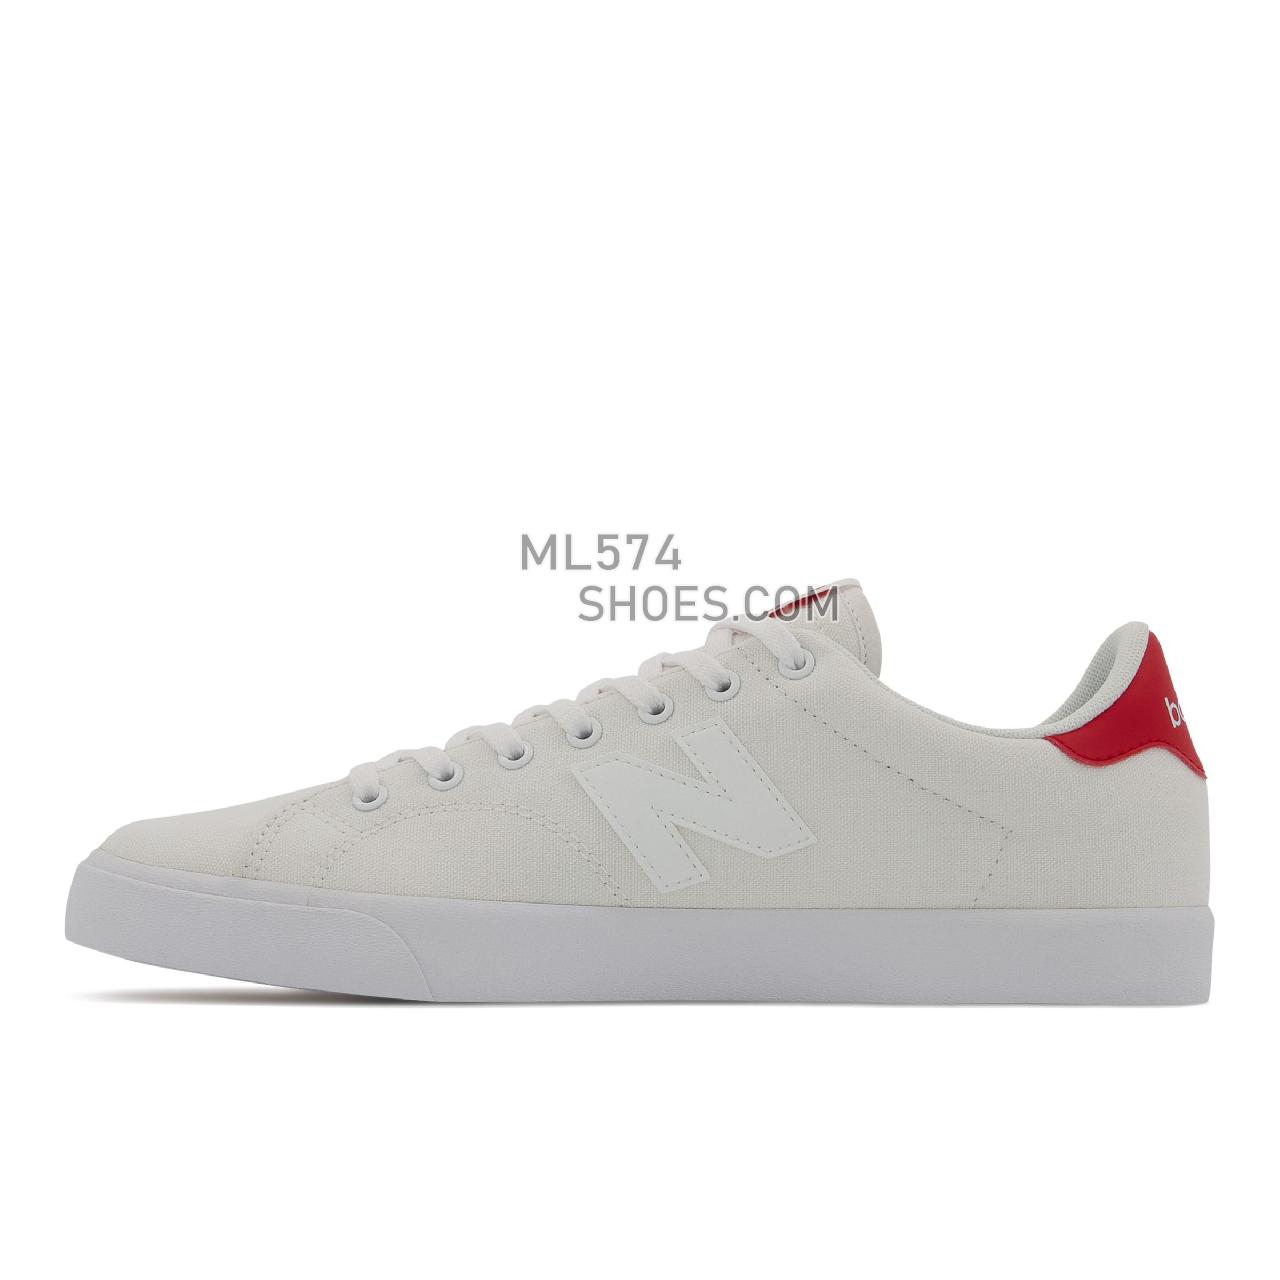 New Balance CT210 - Unisex Men's Women's Court Classics - White with Red - CT210WWR